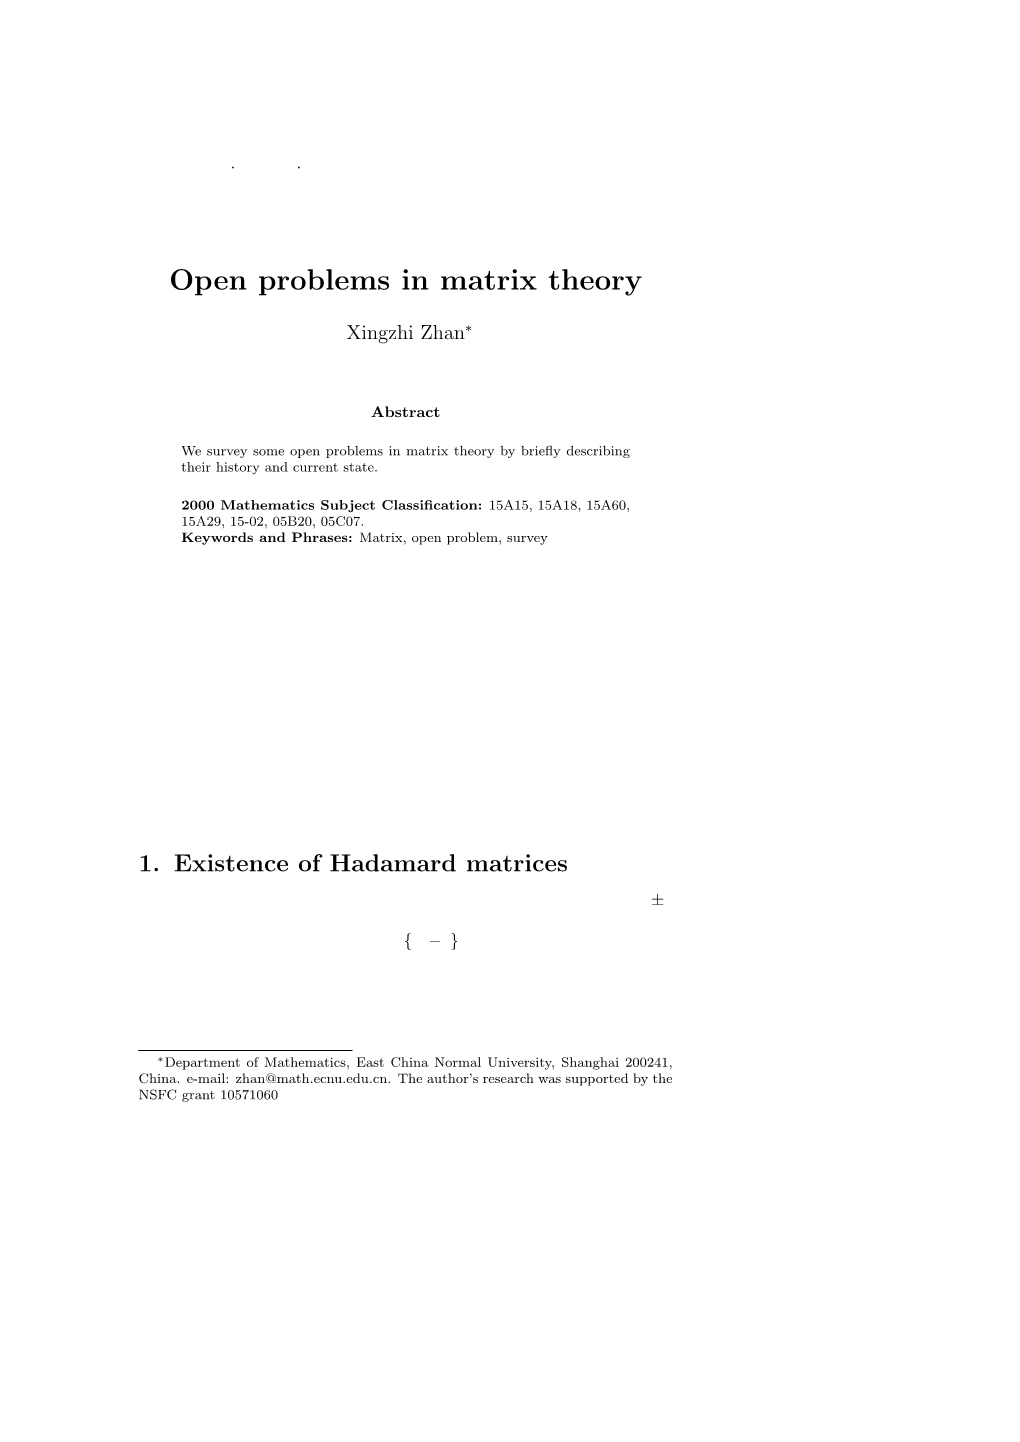 Open Problems in Matrix Theory